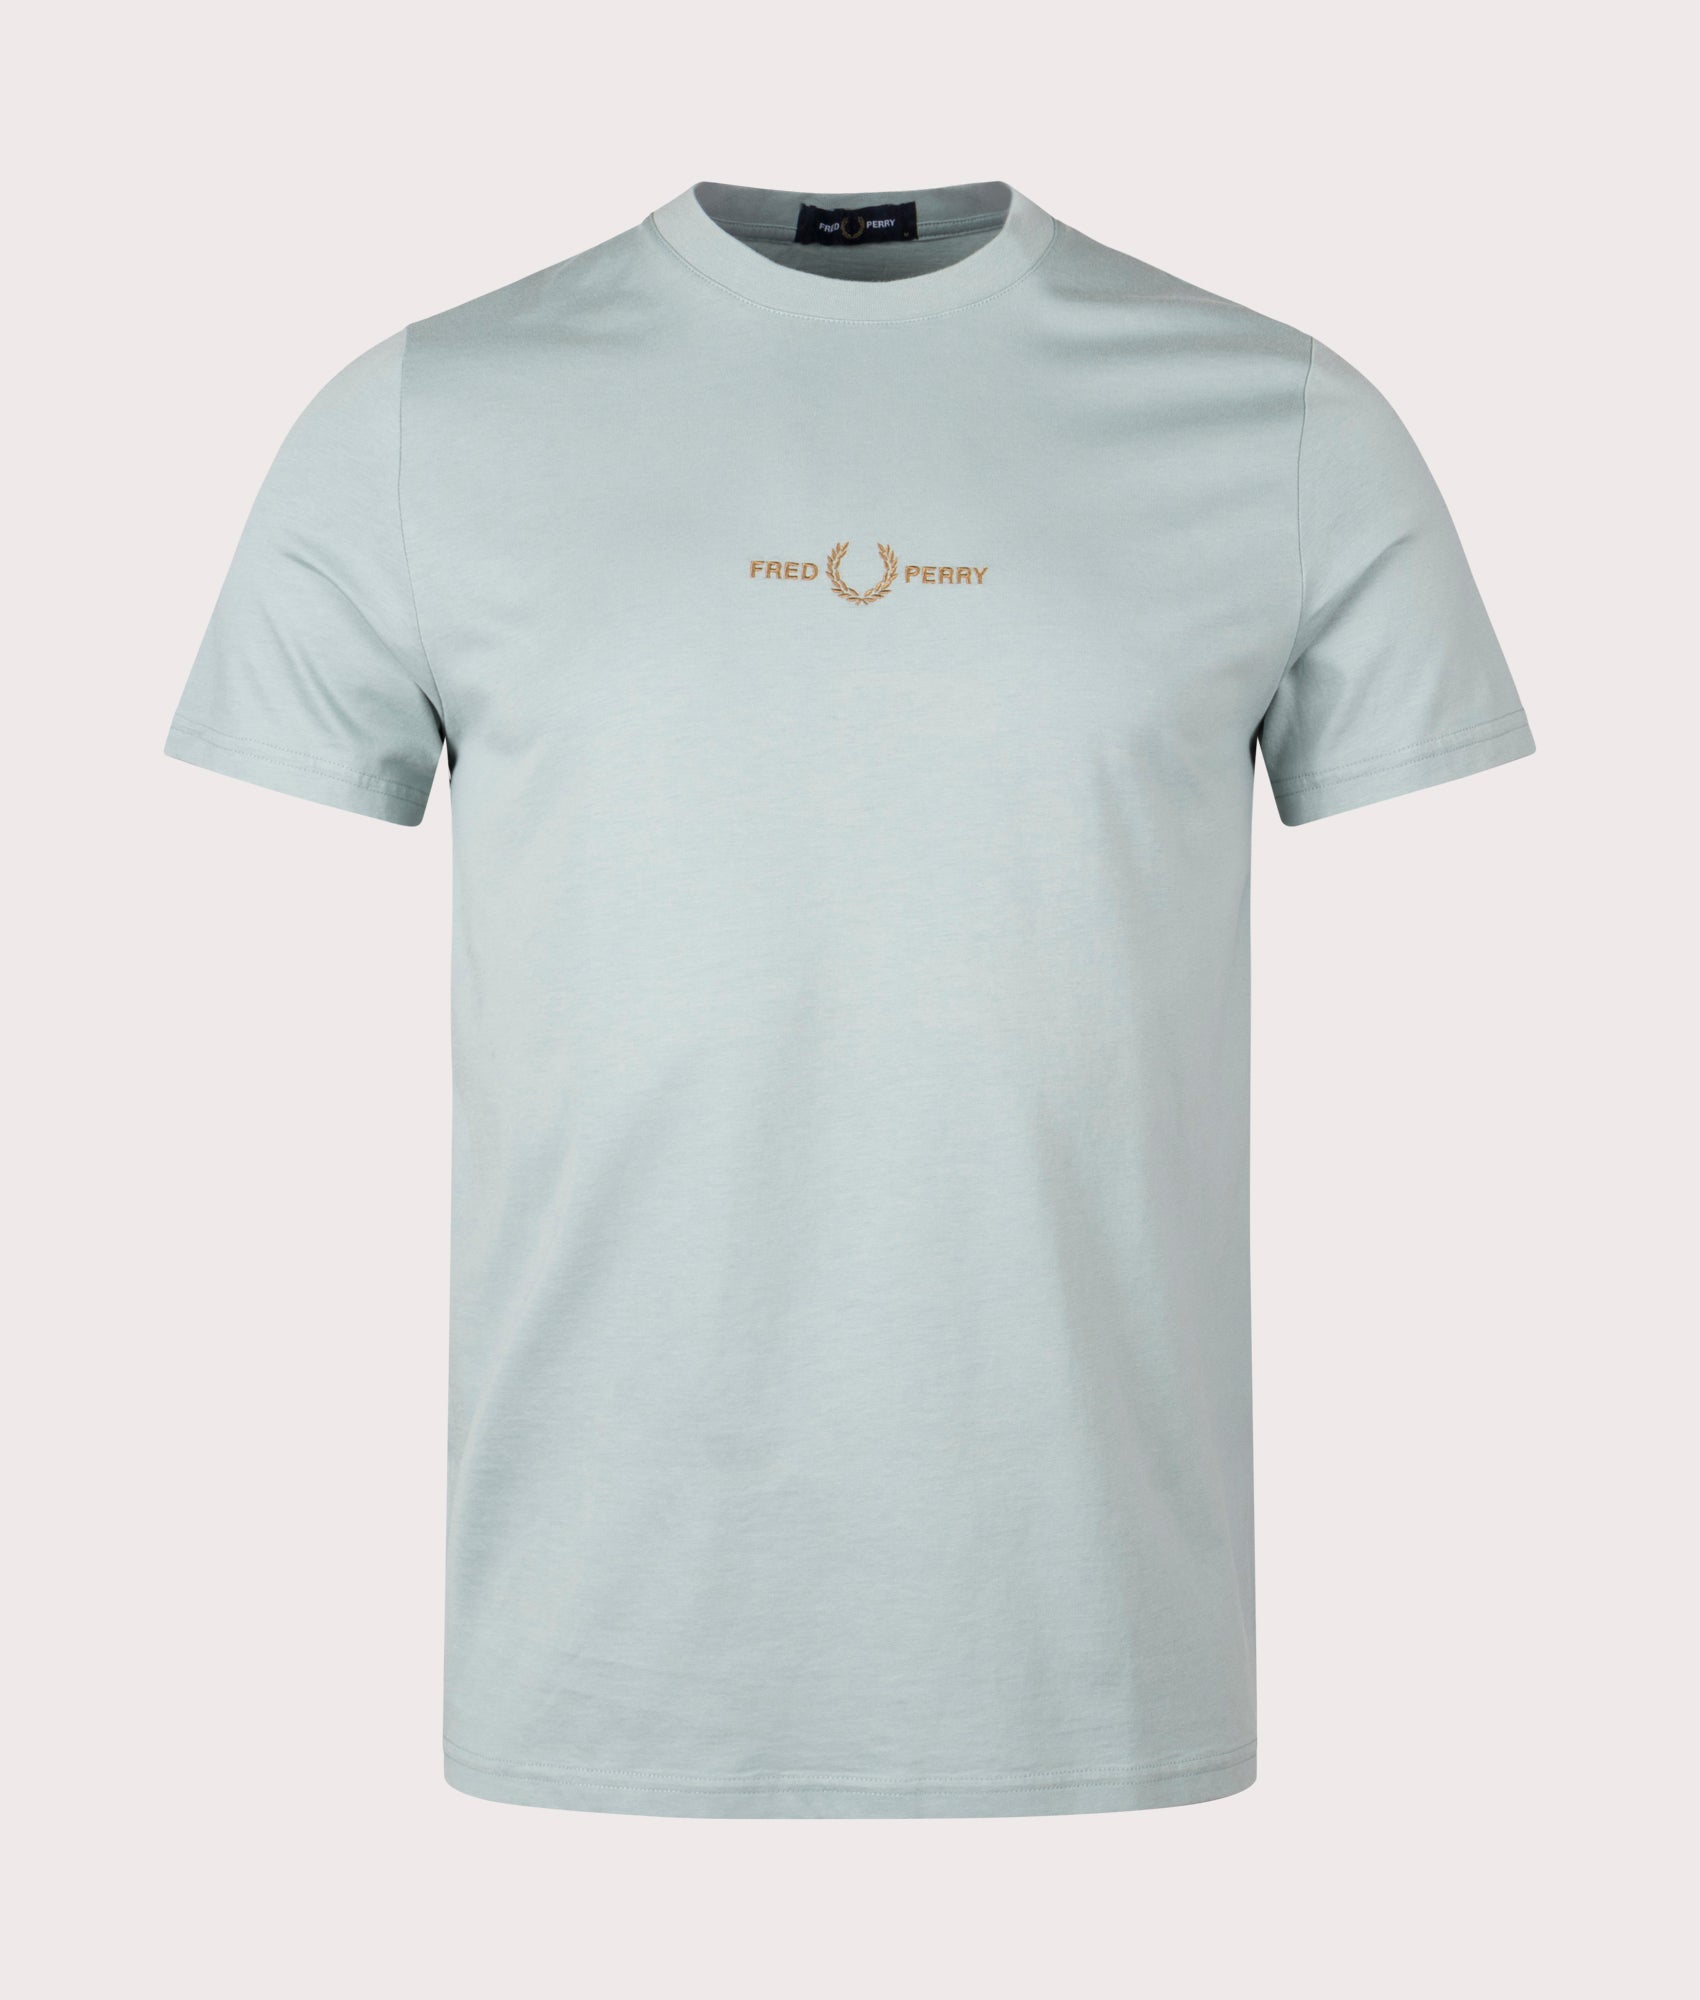 Fred Perry Mens Embroidered T-Shirt - Colour: 959 Silver Blue - Size: Large